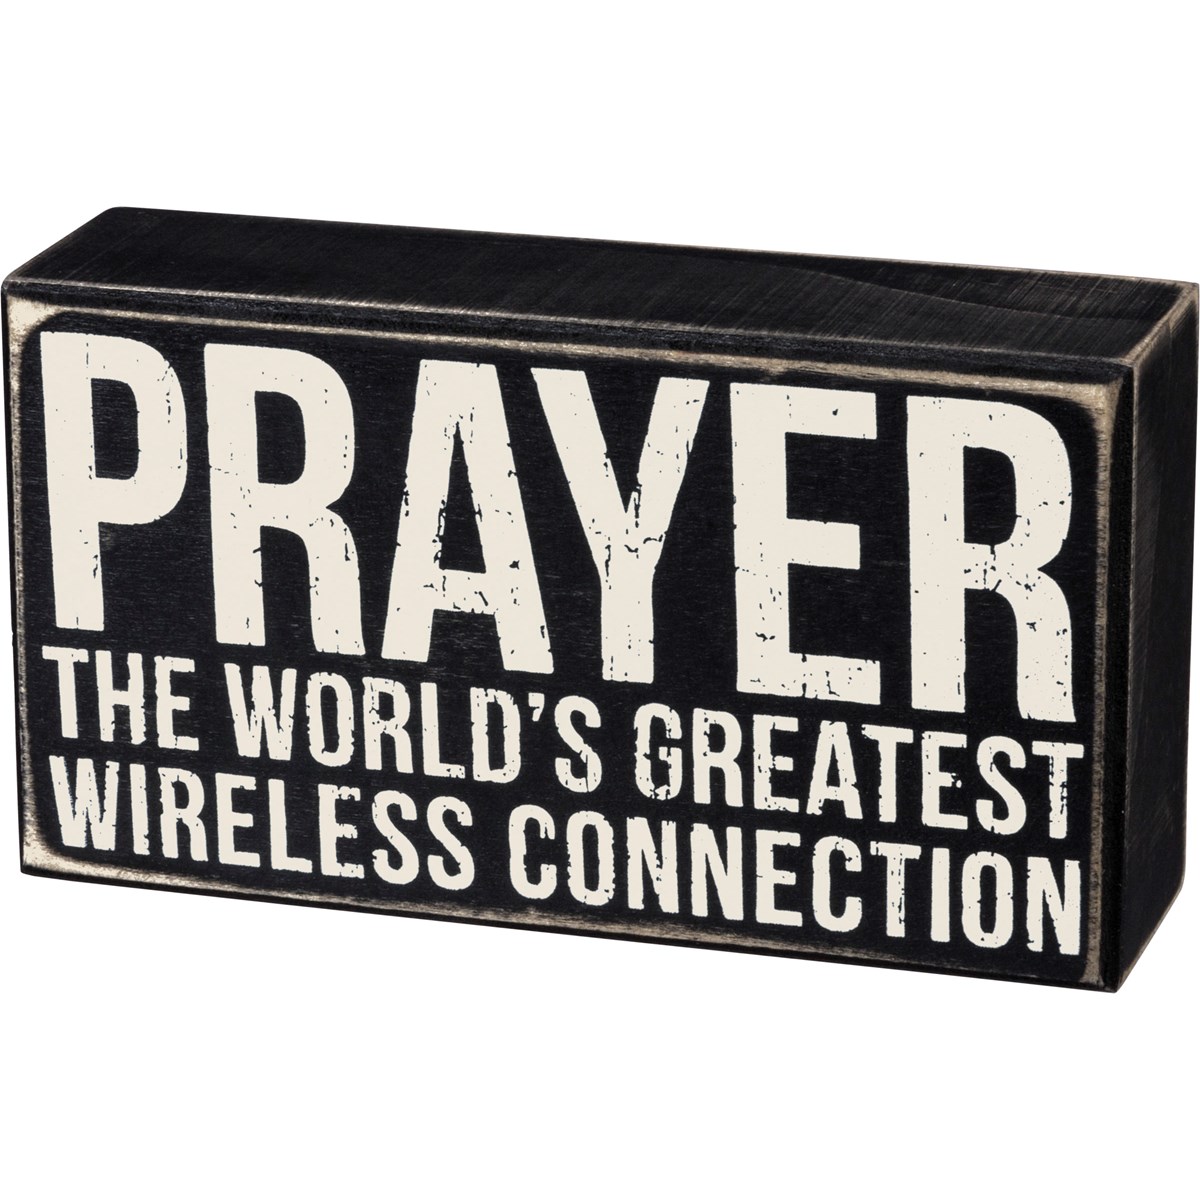 Wireless Connection Box Sign - Wood